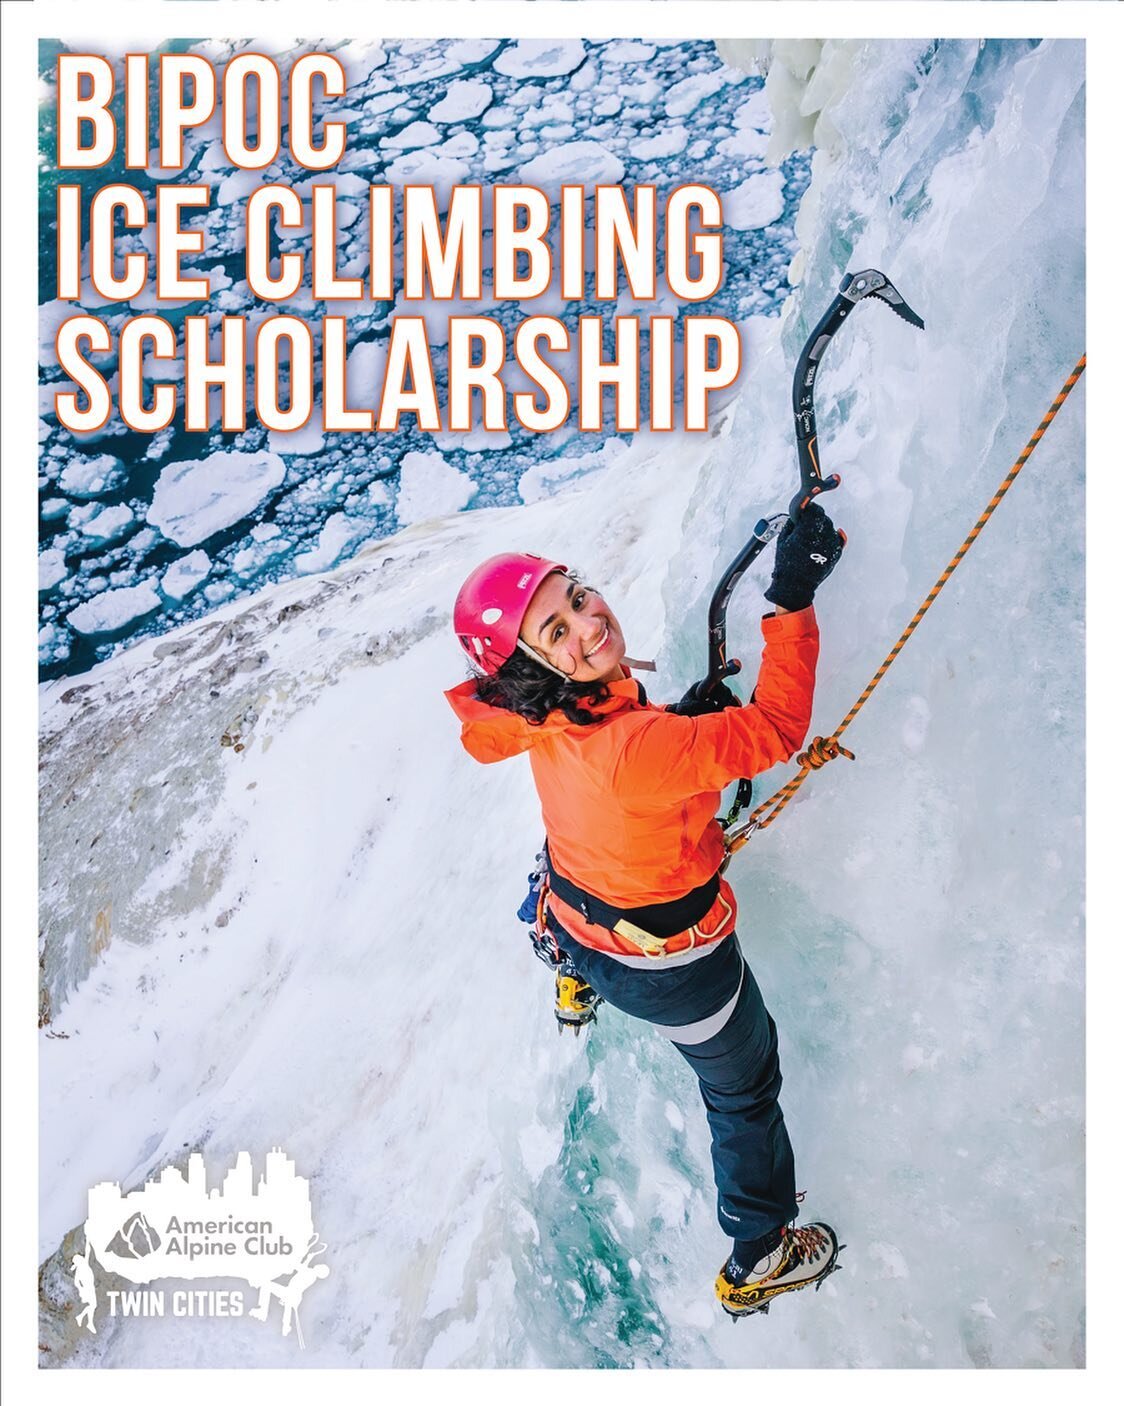 The application deadline for the BIPOC Ice Climbing Scholarship has been extended! Applications are now due on Friday, October 21st at 9 PM &mdash; link in our bio for more info and to apply! 

Every year, the American Alpine Club Twin Cities Chapter